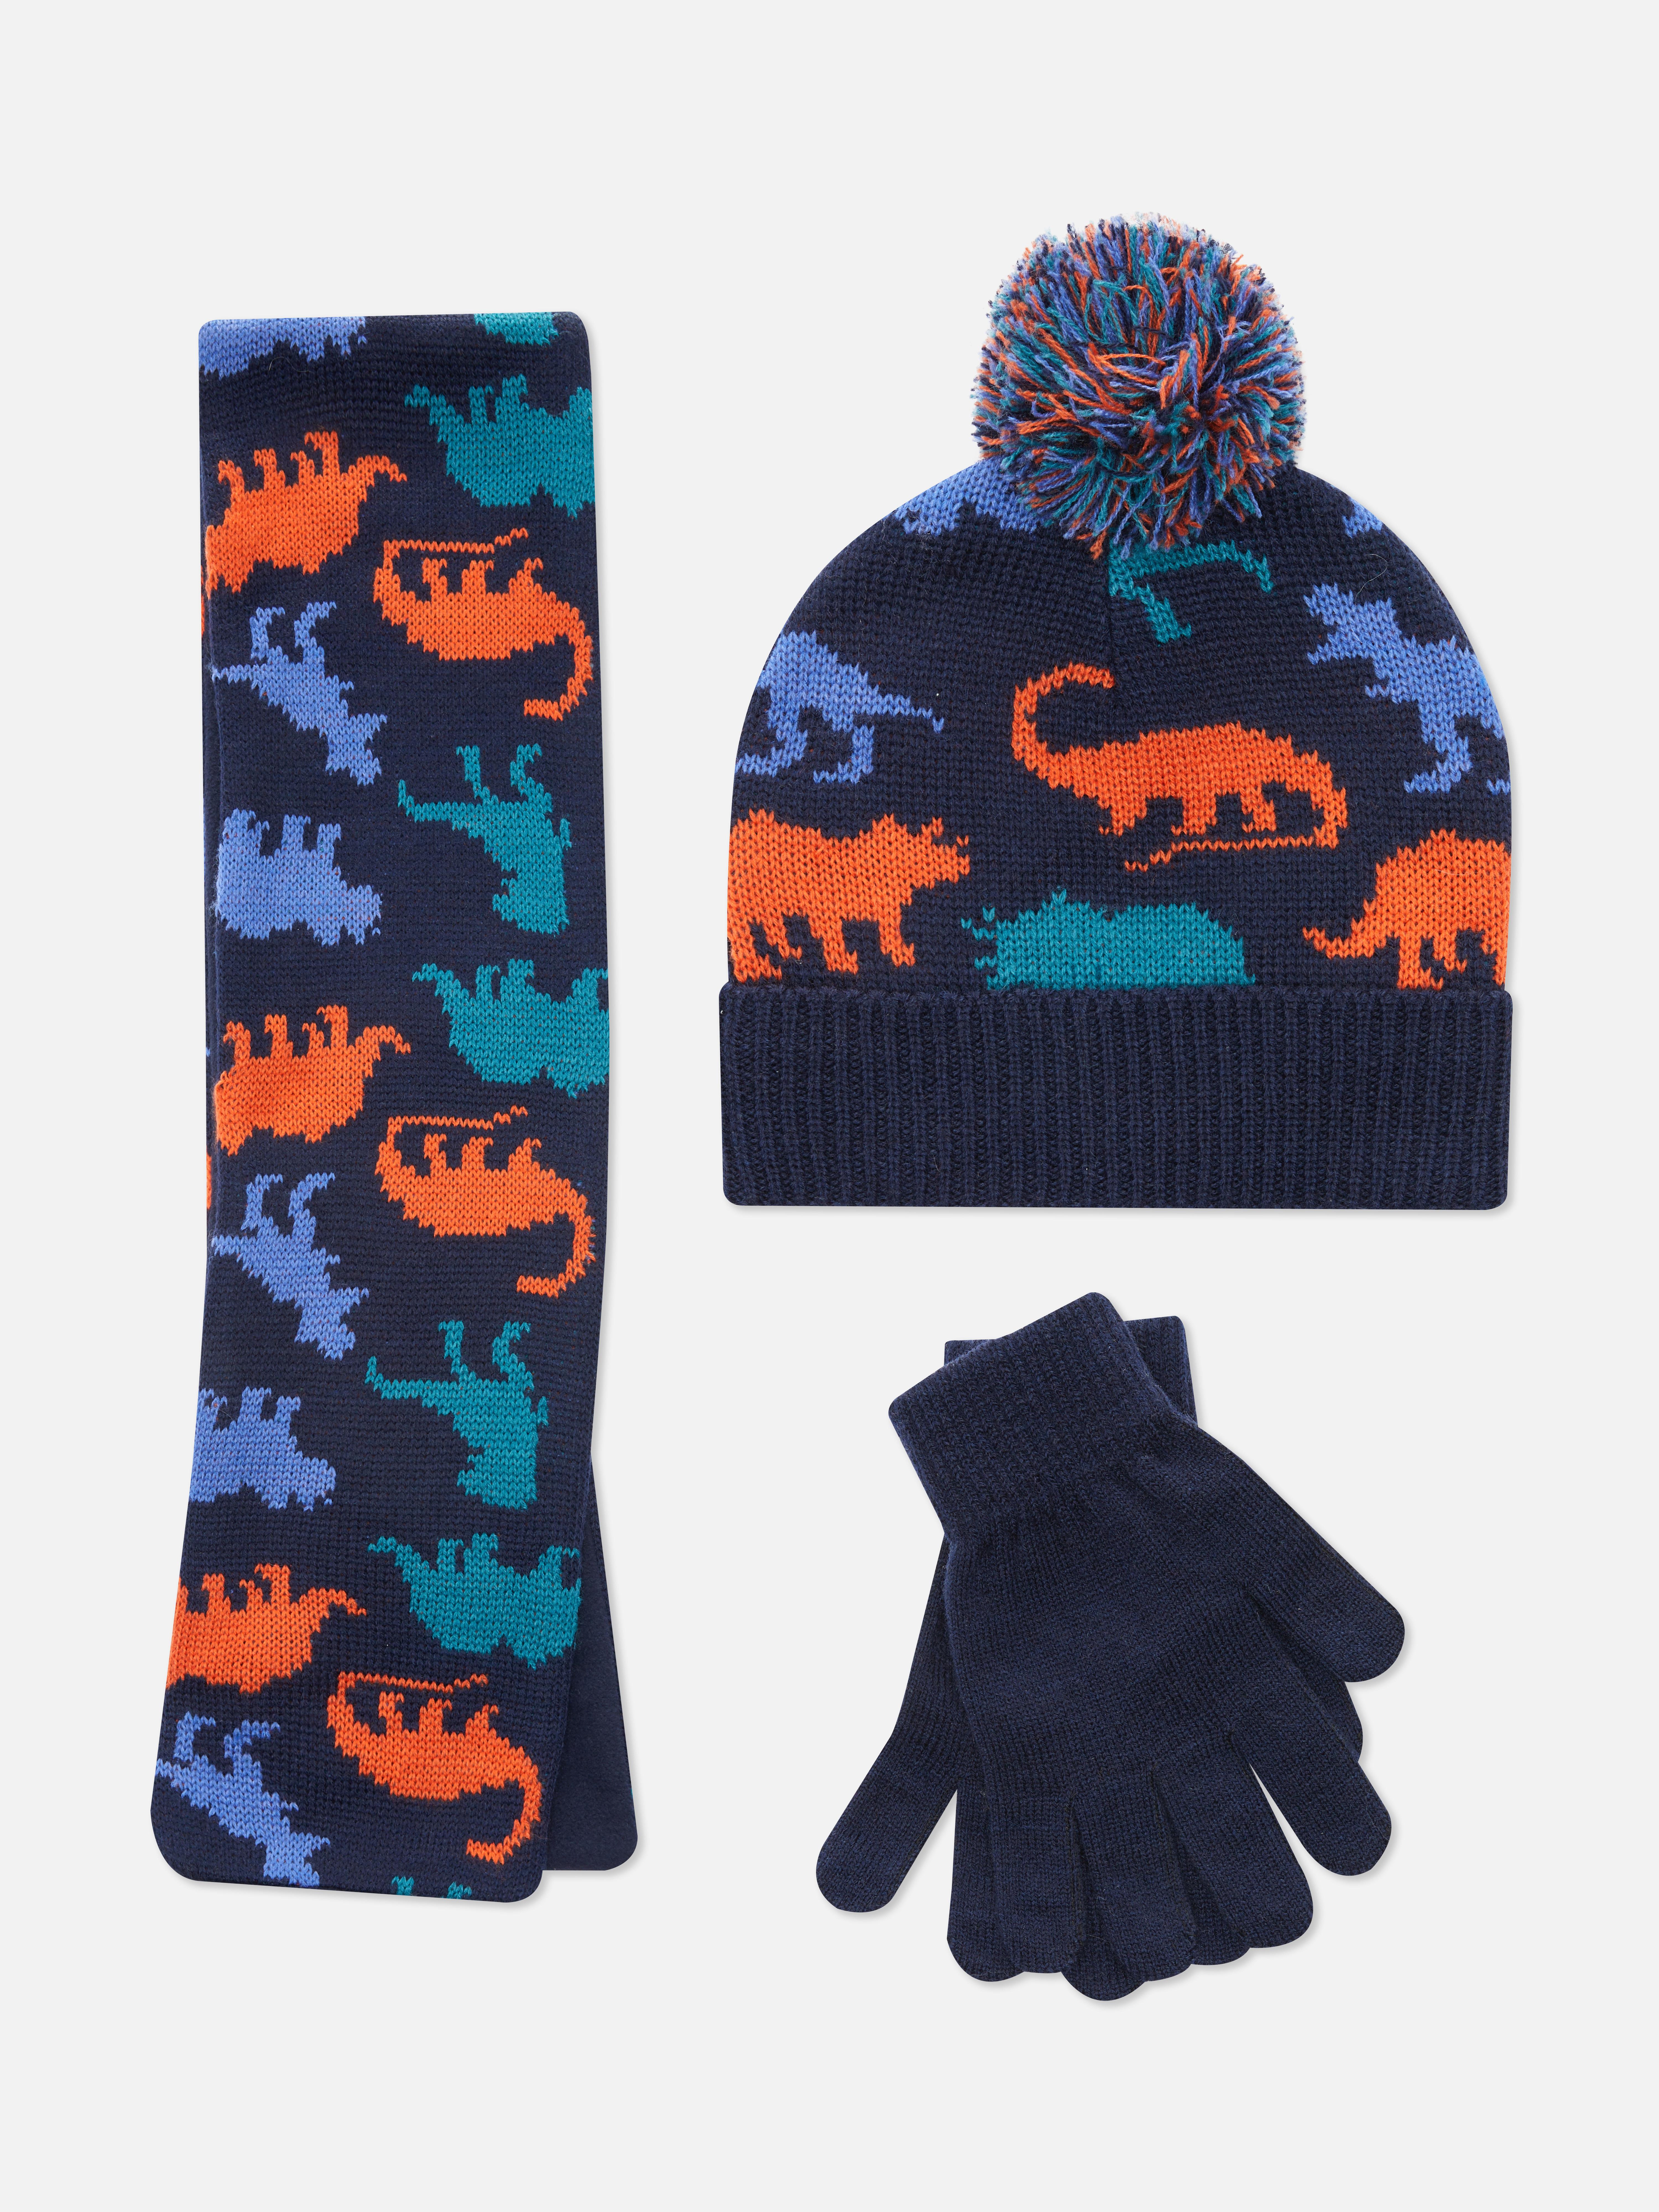 Knitted Dinosaur Scarf, Gloves and Hat Set